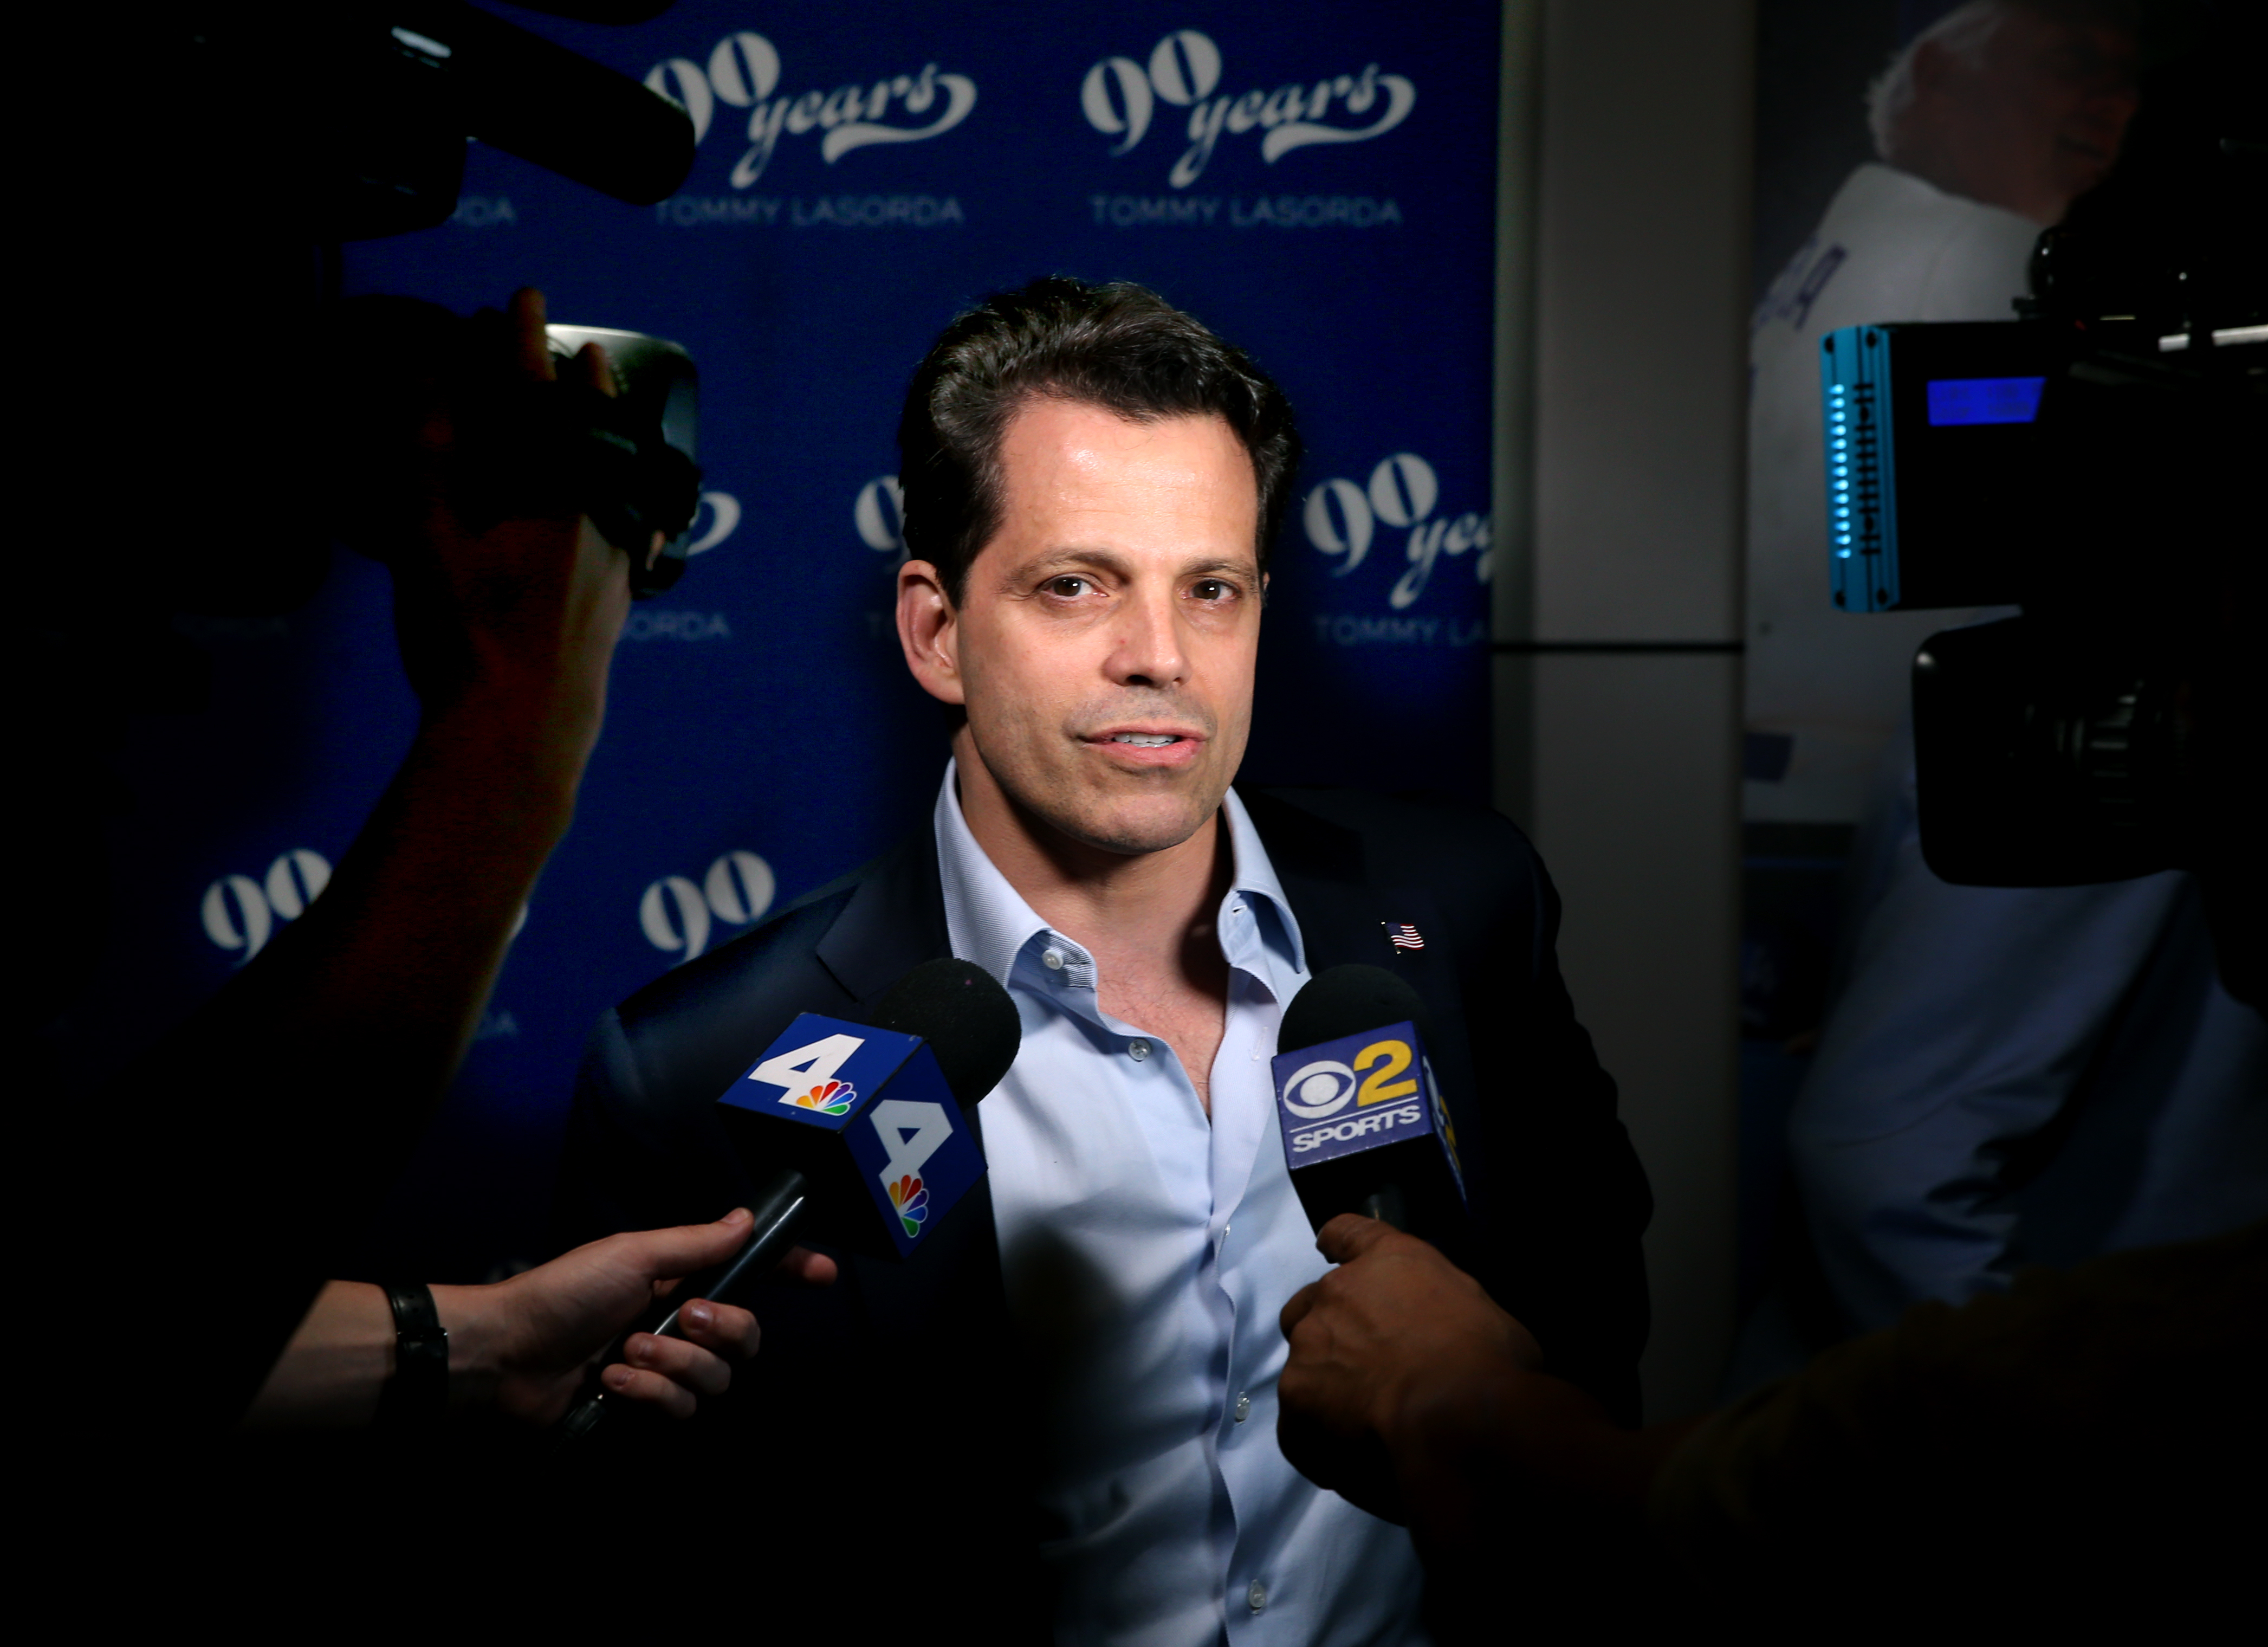 Anthony Scaramucci at Tommy Lasorda's 90th birthday celebration at the Getty Center on Sept. 24, 2017 in Los Angeles, California. (Phillip Faraone/Getty Images for Tommy Lasorda)